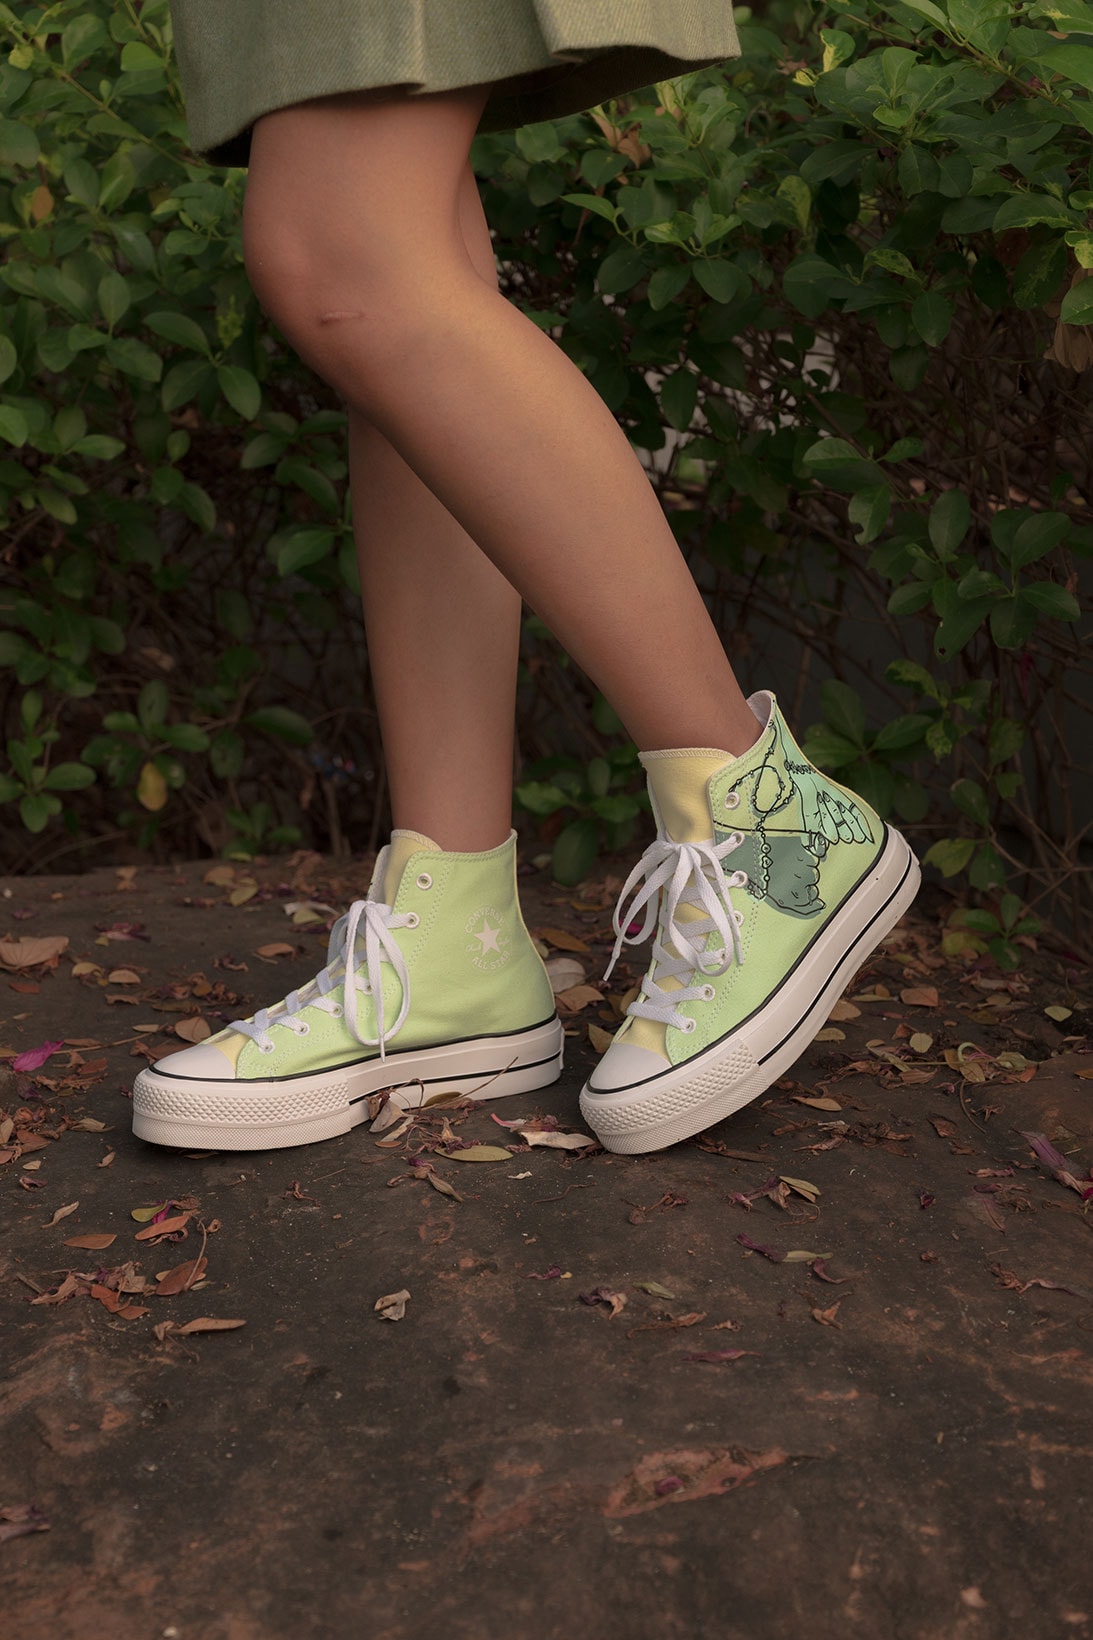 converse by you millie bobby brown pauline wattanodom artist chuck taylor all star high top platform sneakers collaboration green